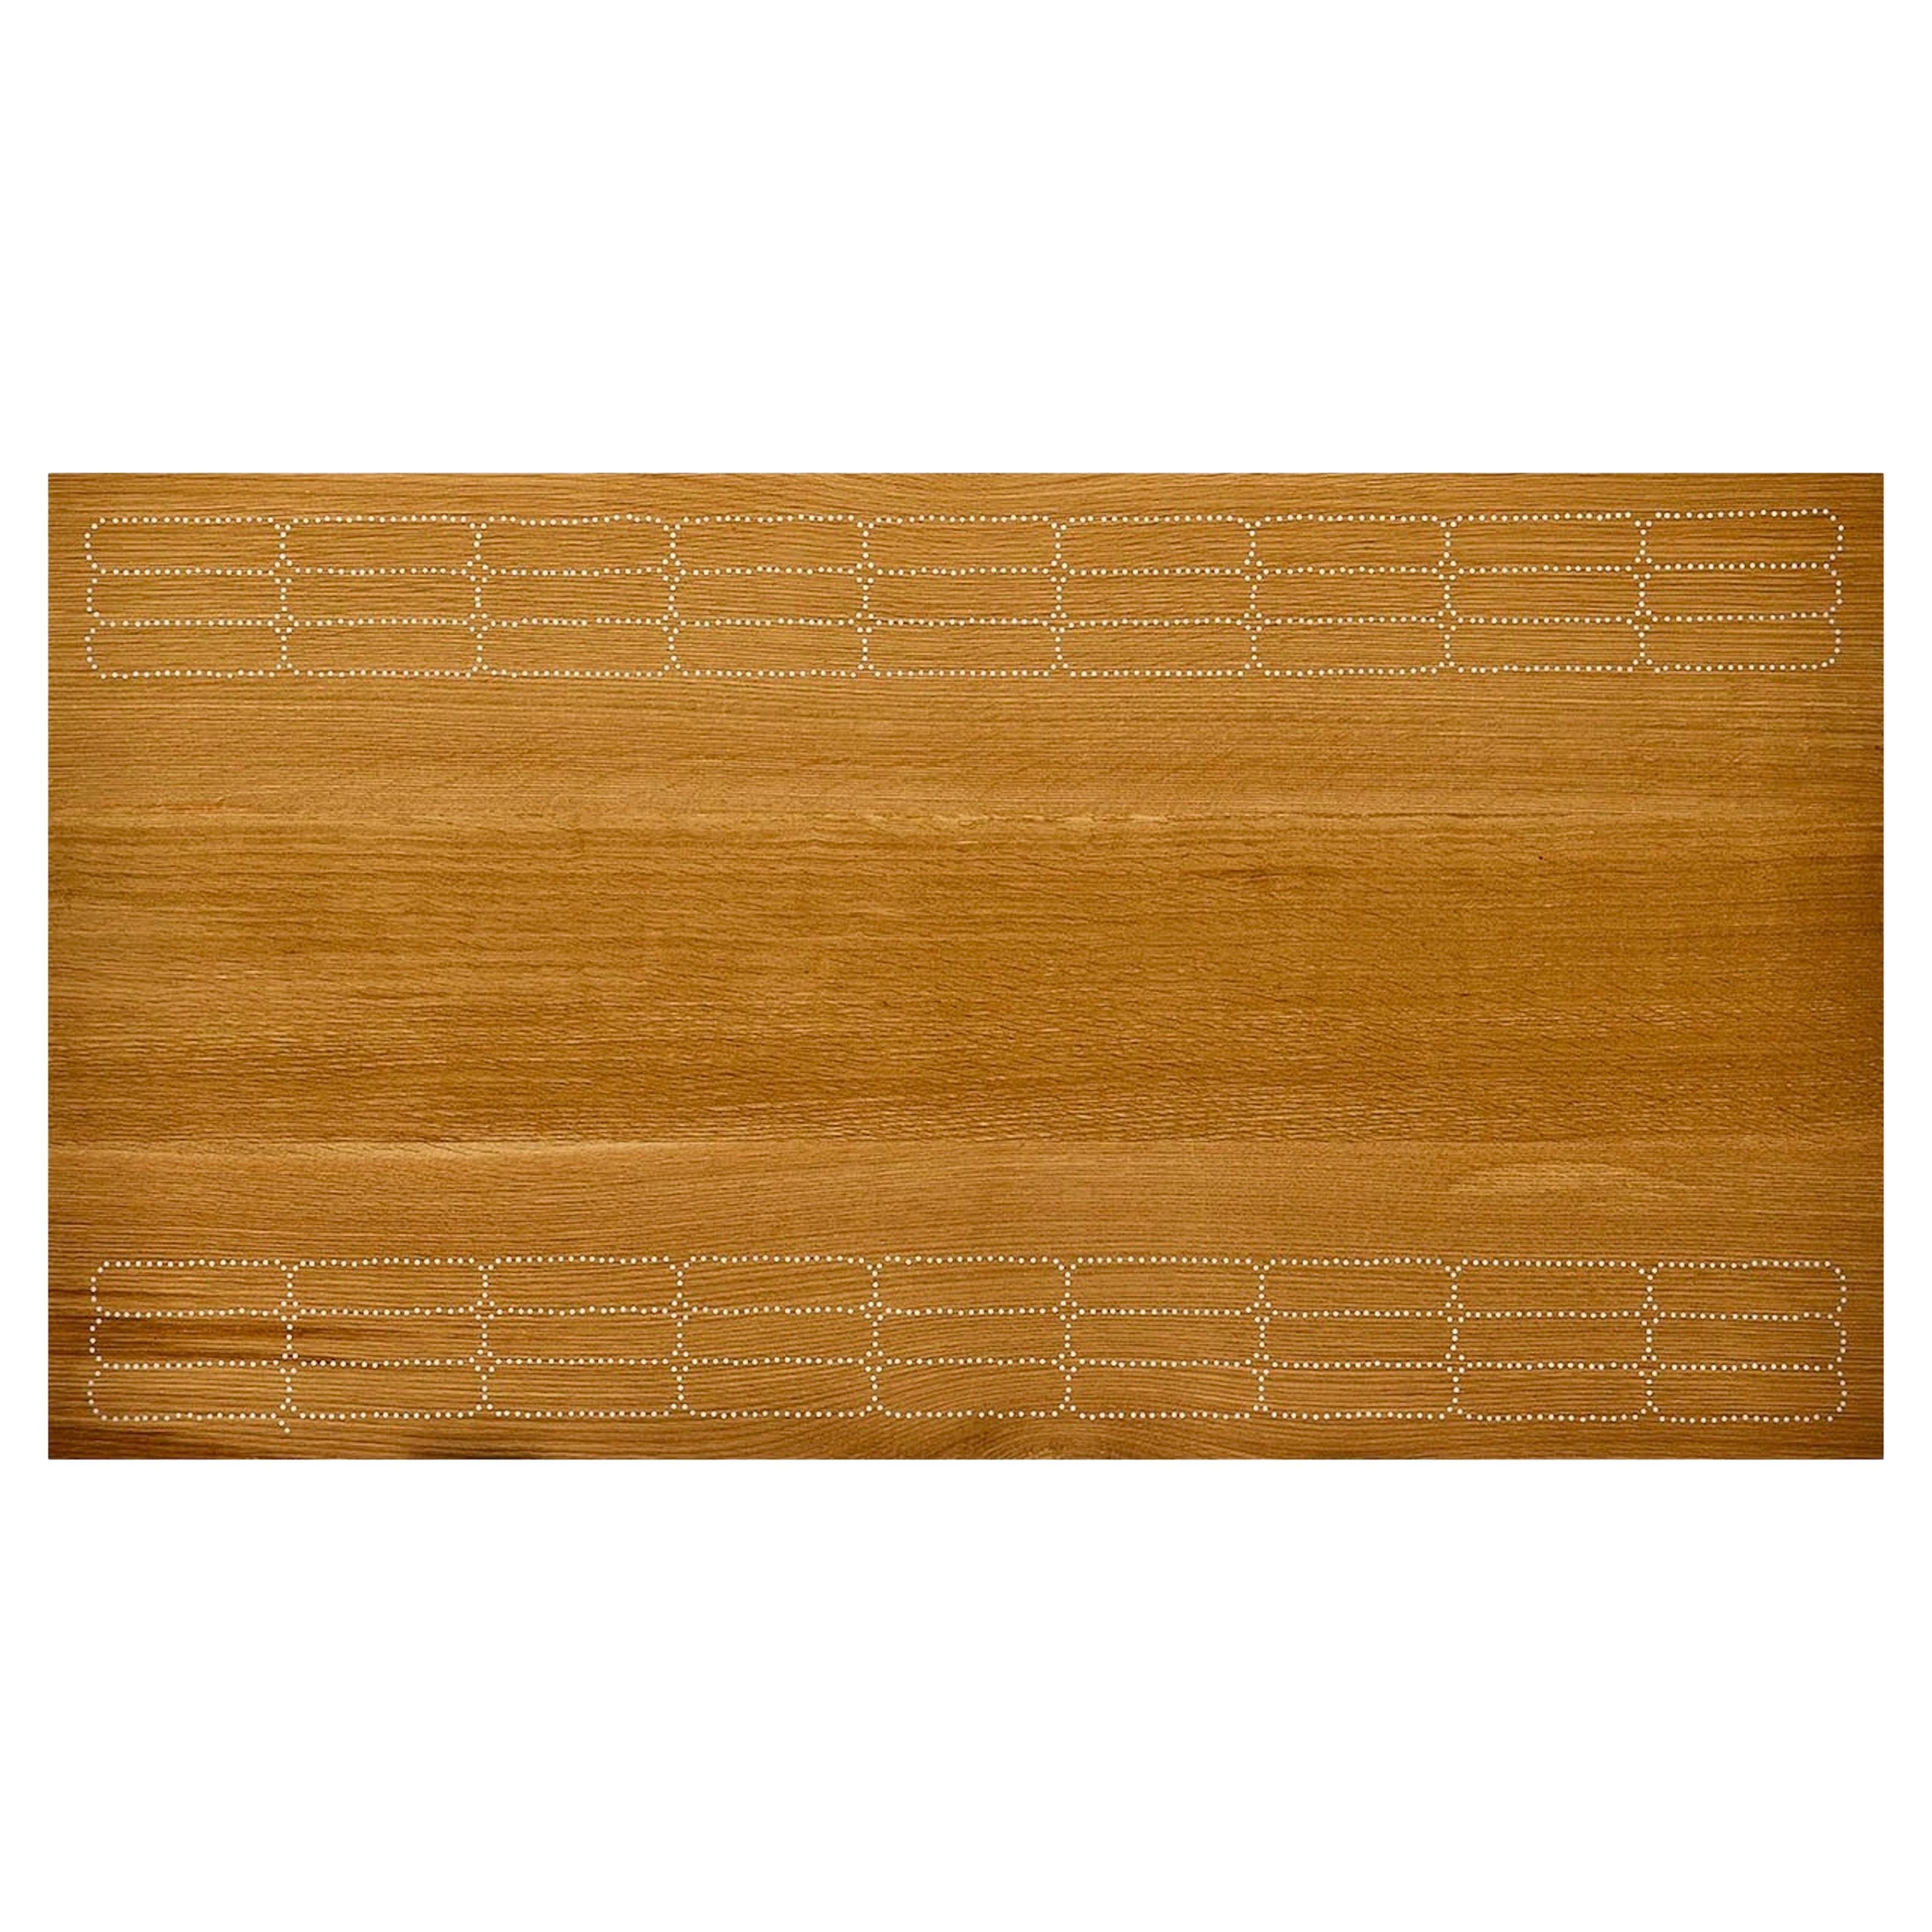 Nail Inlay Wall Piece No. 17      white oak, nails For Sale